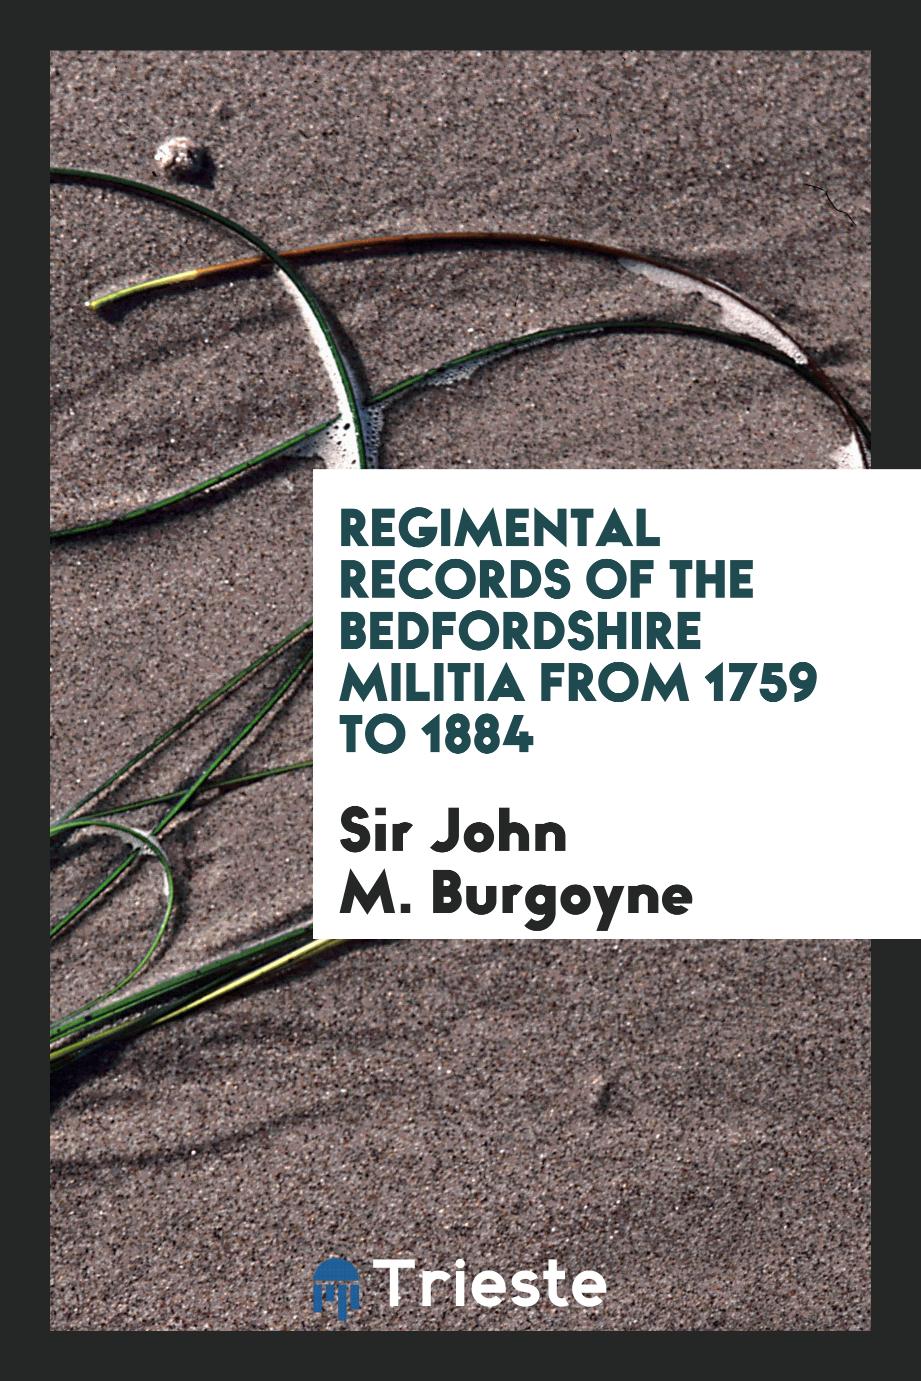 Regimental Records of the Bedfordshire Militia from 1759 to 1884